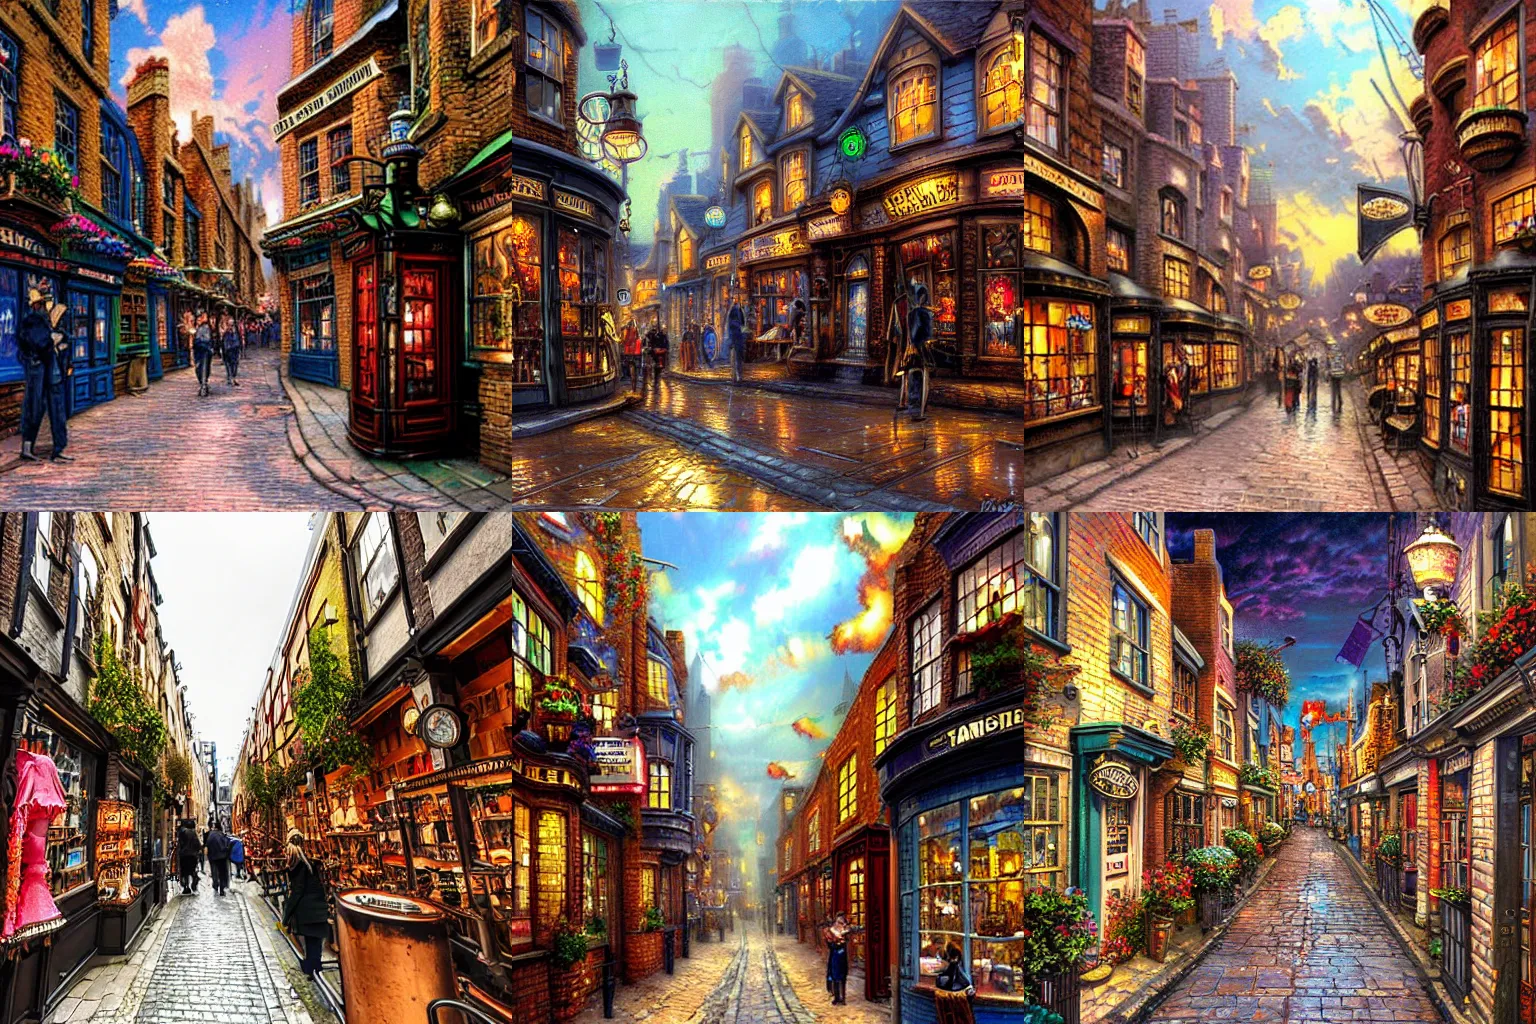 Prompt: narrow steampunk london street lined with colourful shops by thomas kinkade